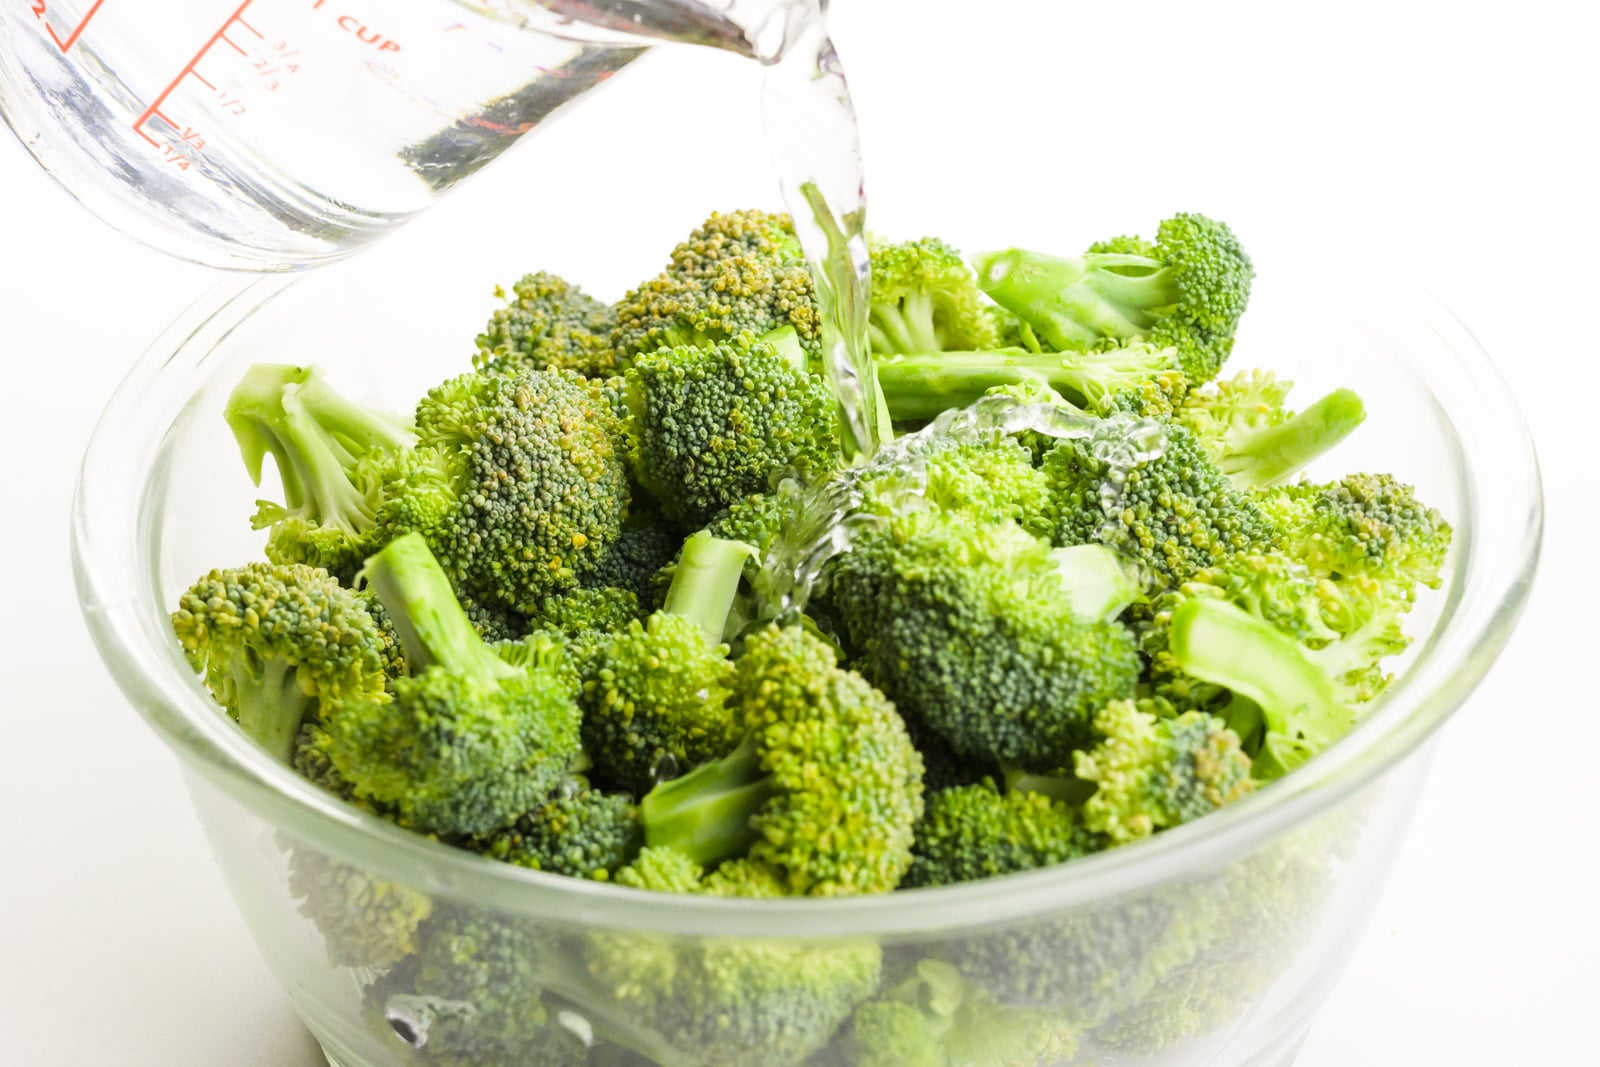 A pyrex measuring cup is full of water that is being poured over a bowl of broccoli florets.